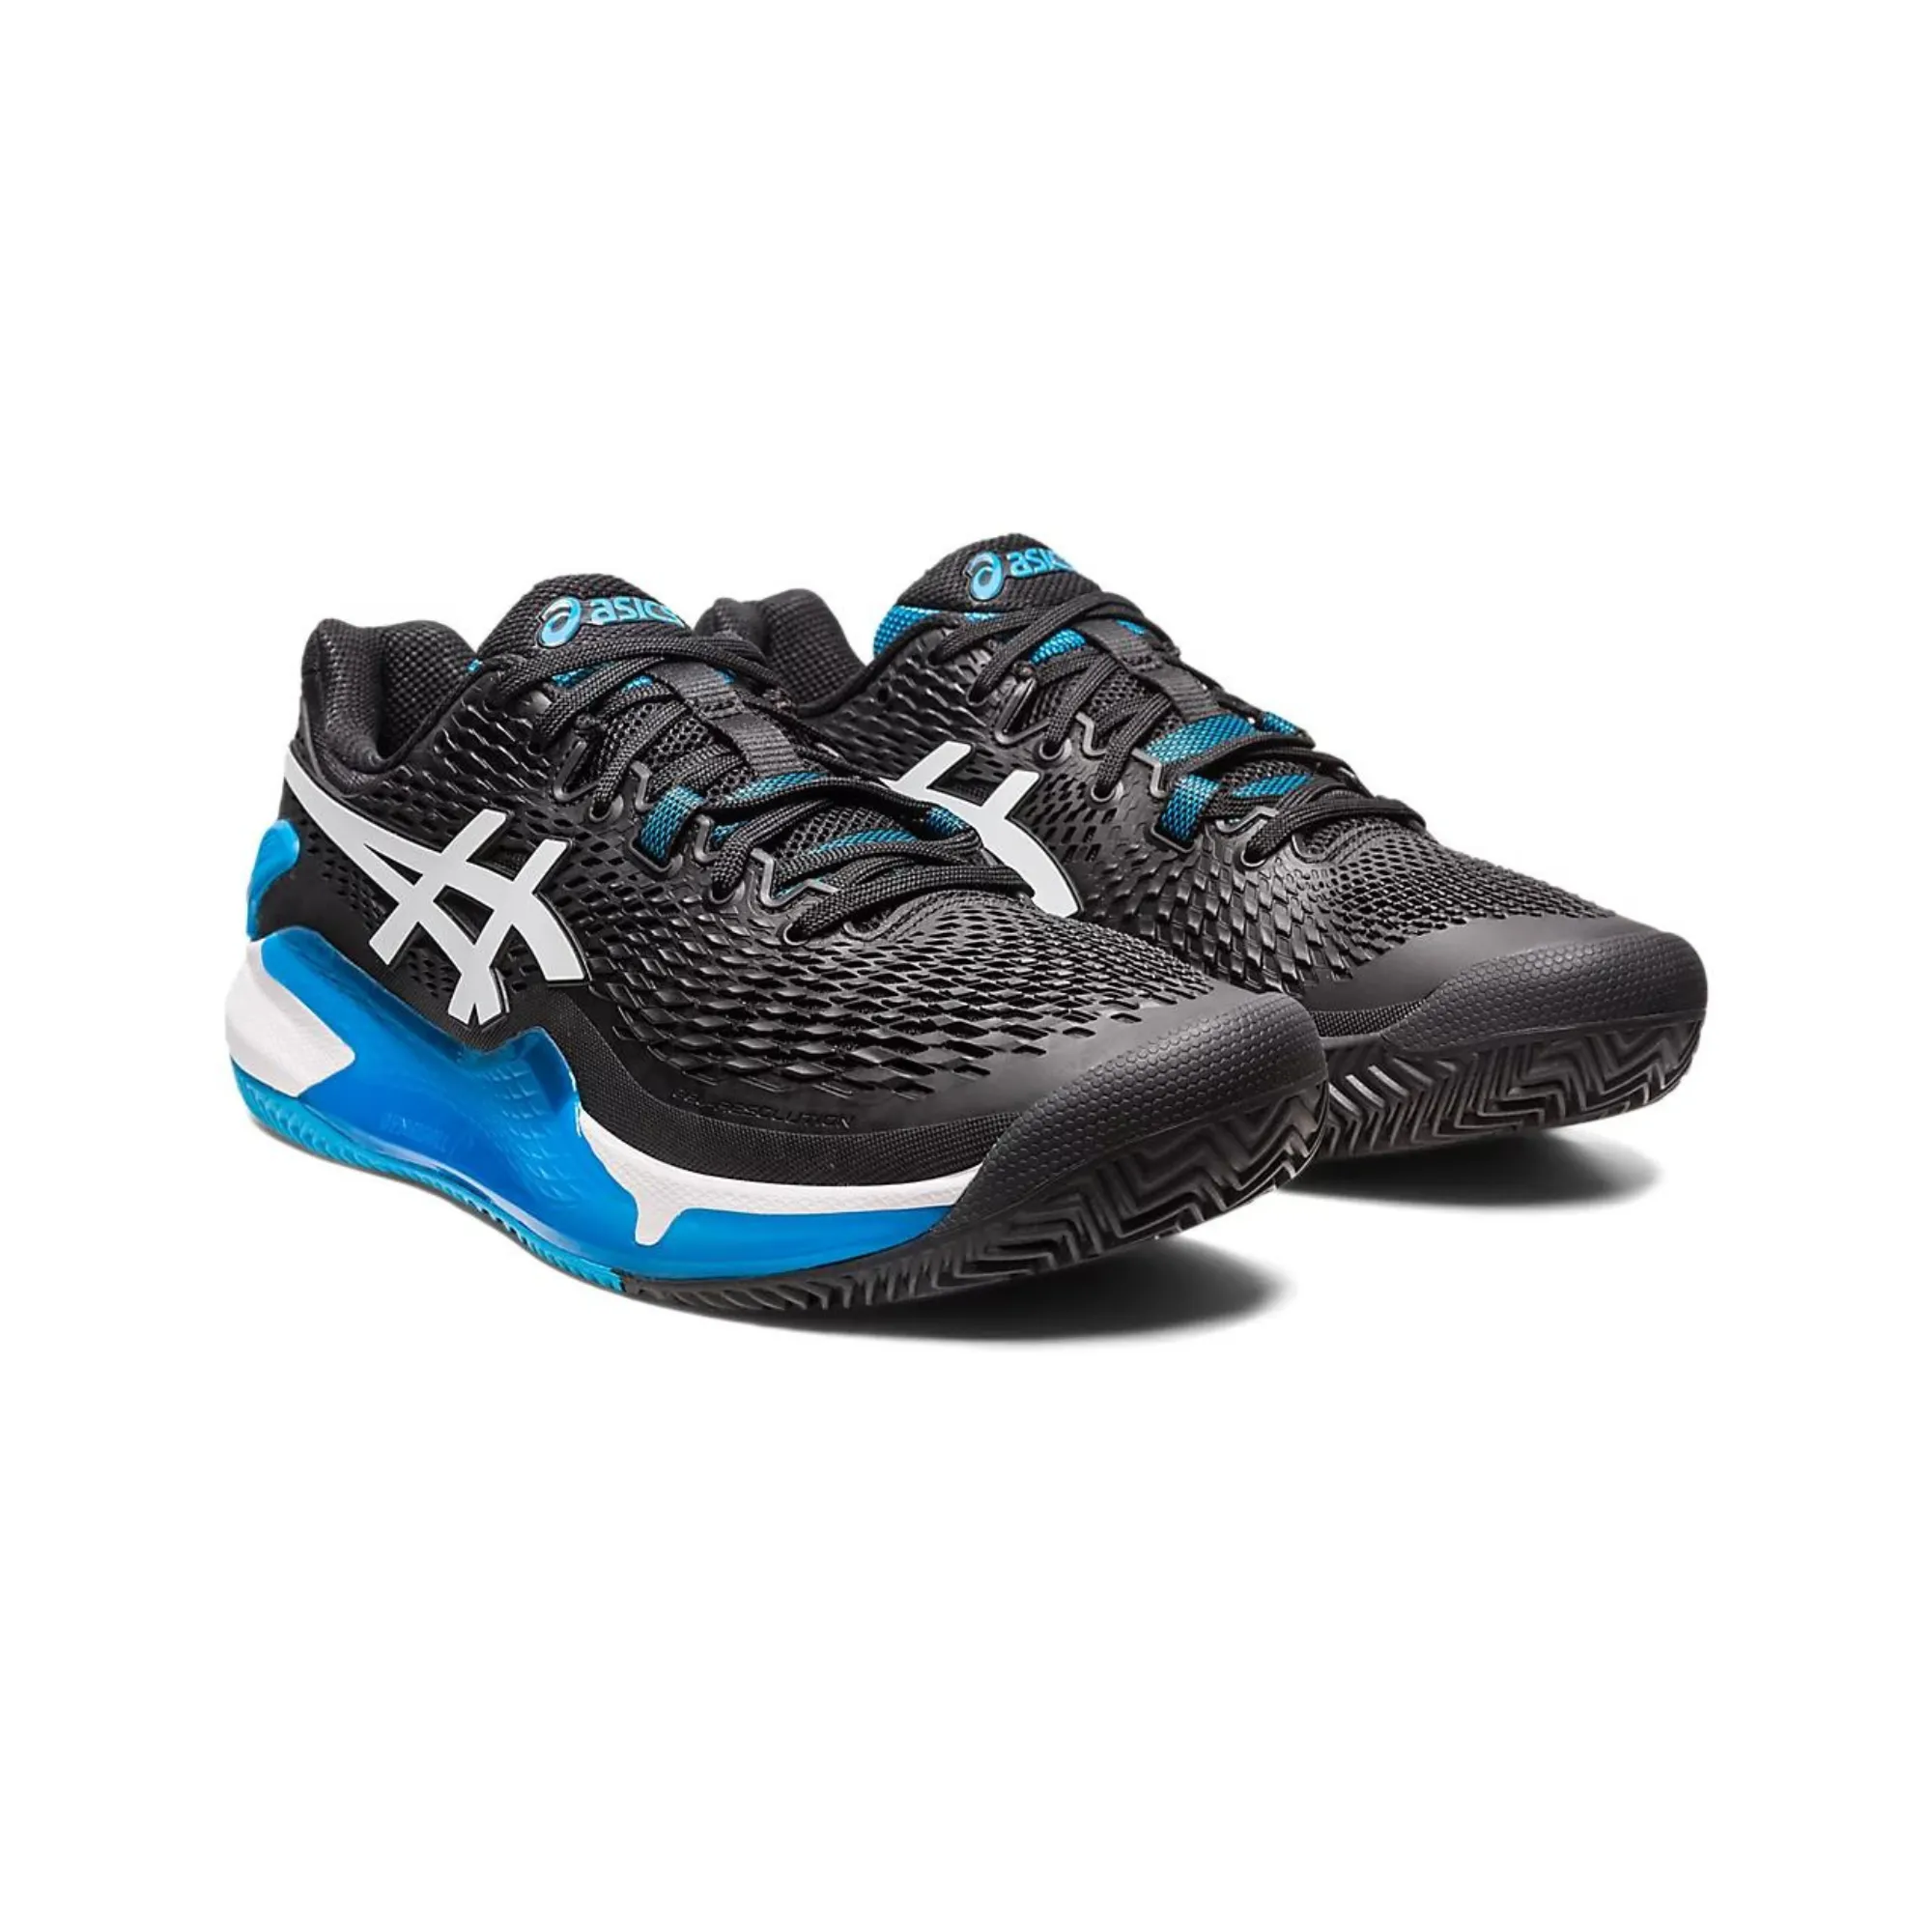 ASICS Men's Gel-Resolution 9 Clay Shoes